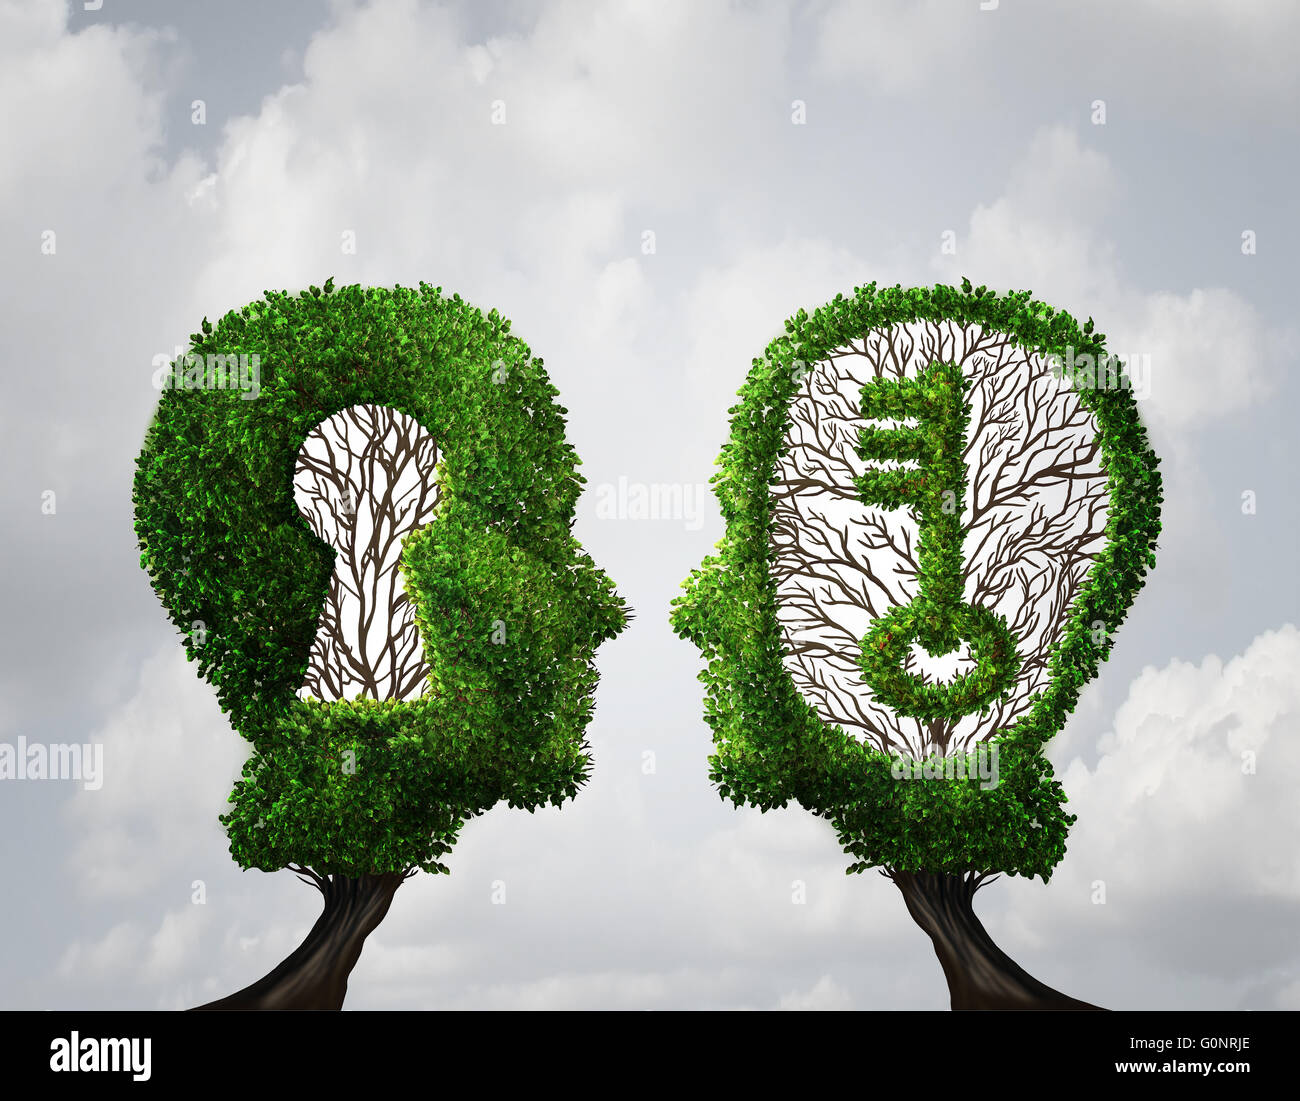 Key hole Solution partnership and key opportunity business concept as two trees shaped as a human head with a key and keyhole shapes as a collaboration success metaphor in a 3D illustration style. Stock Photo